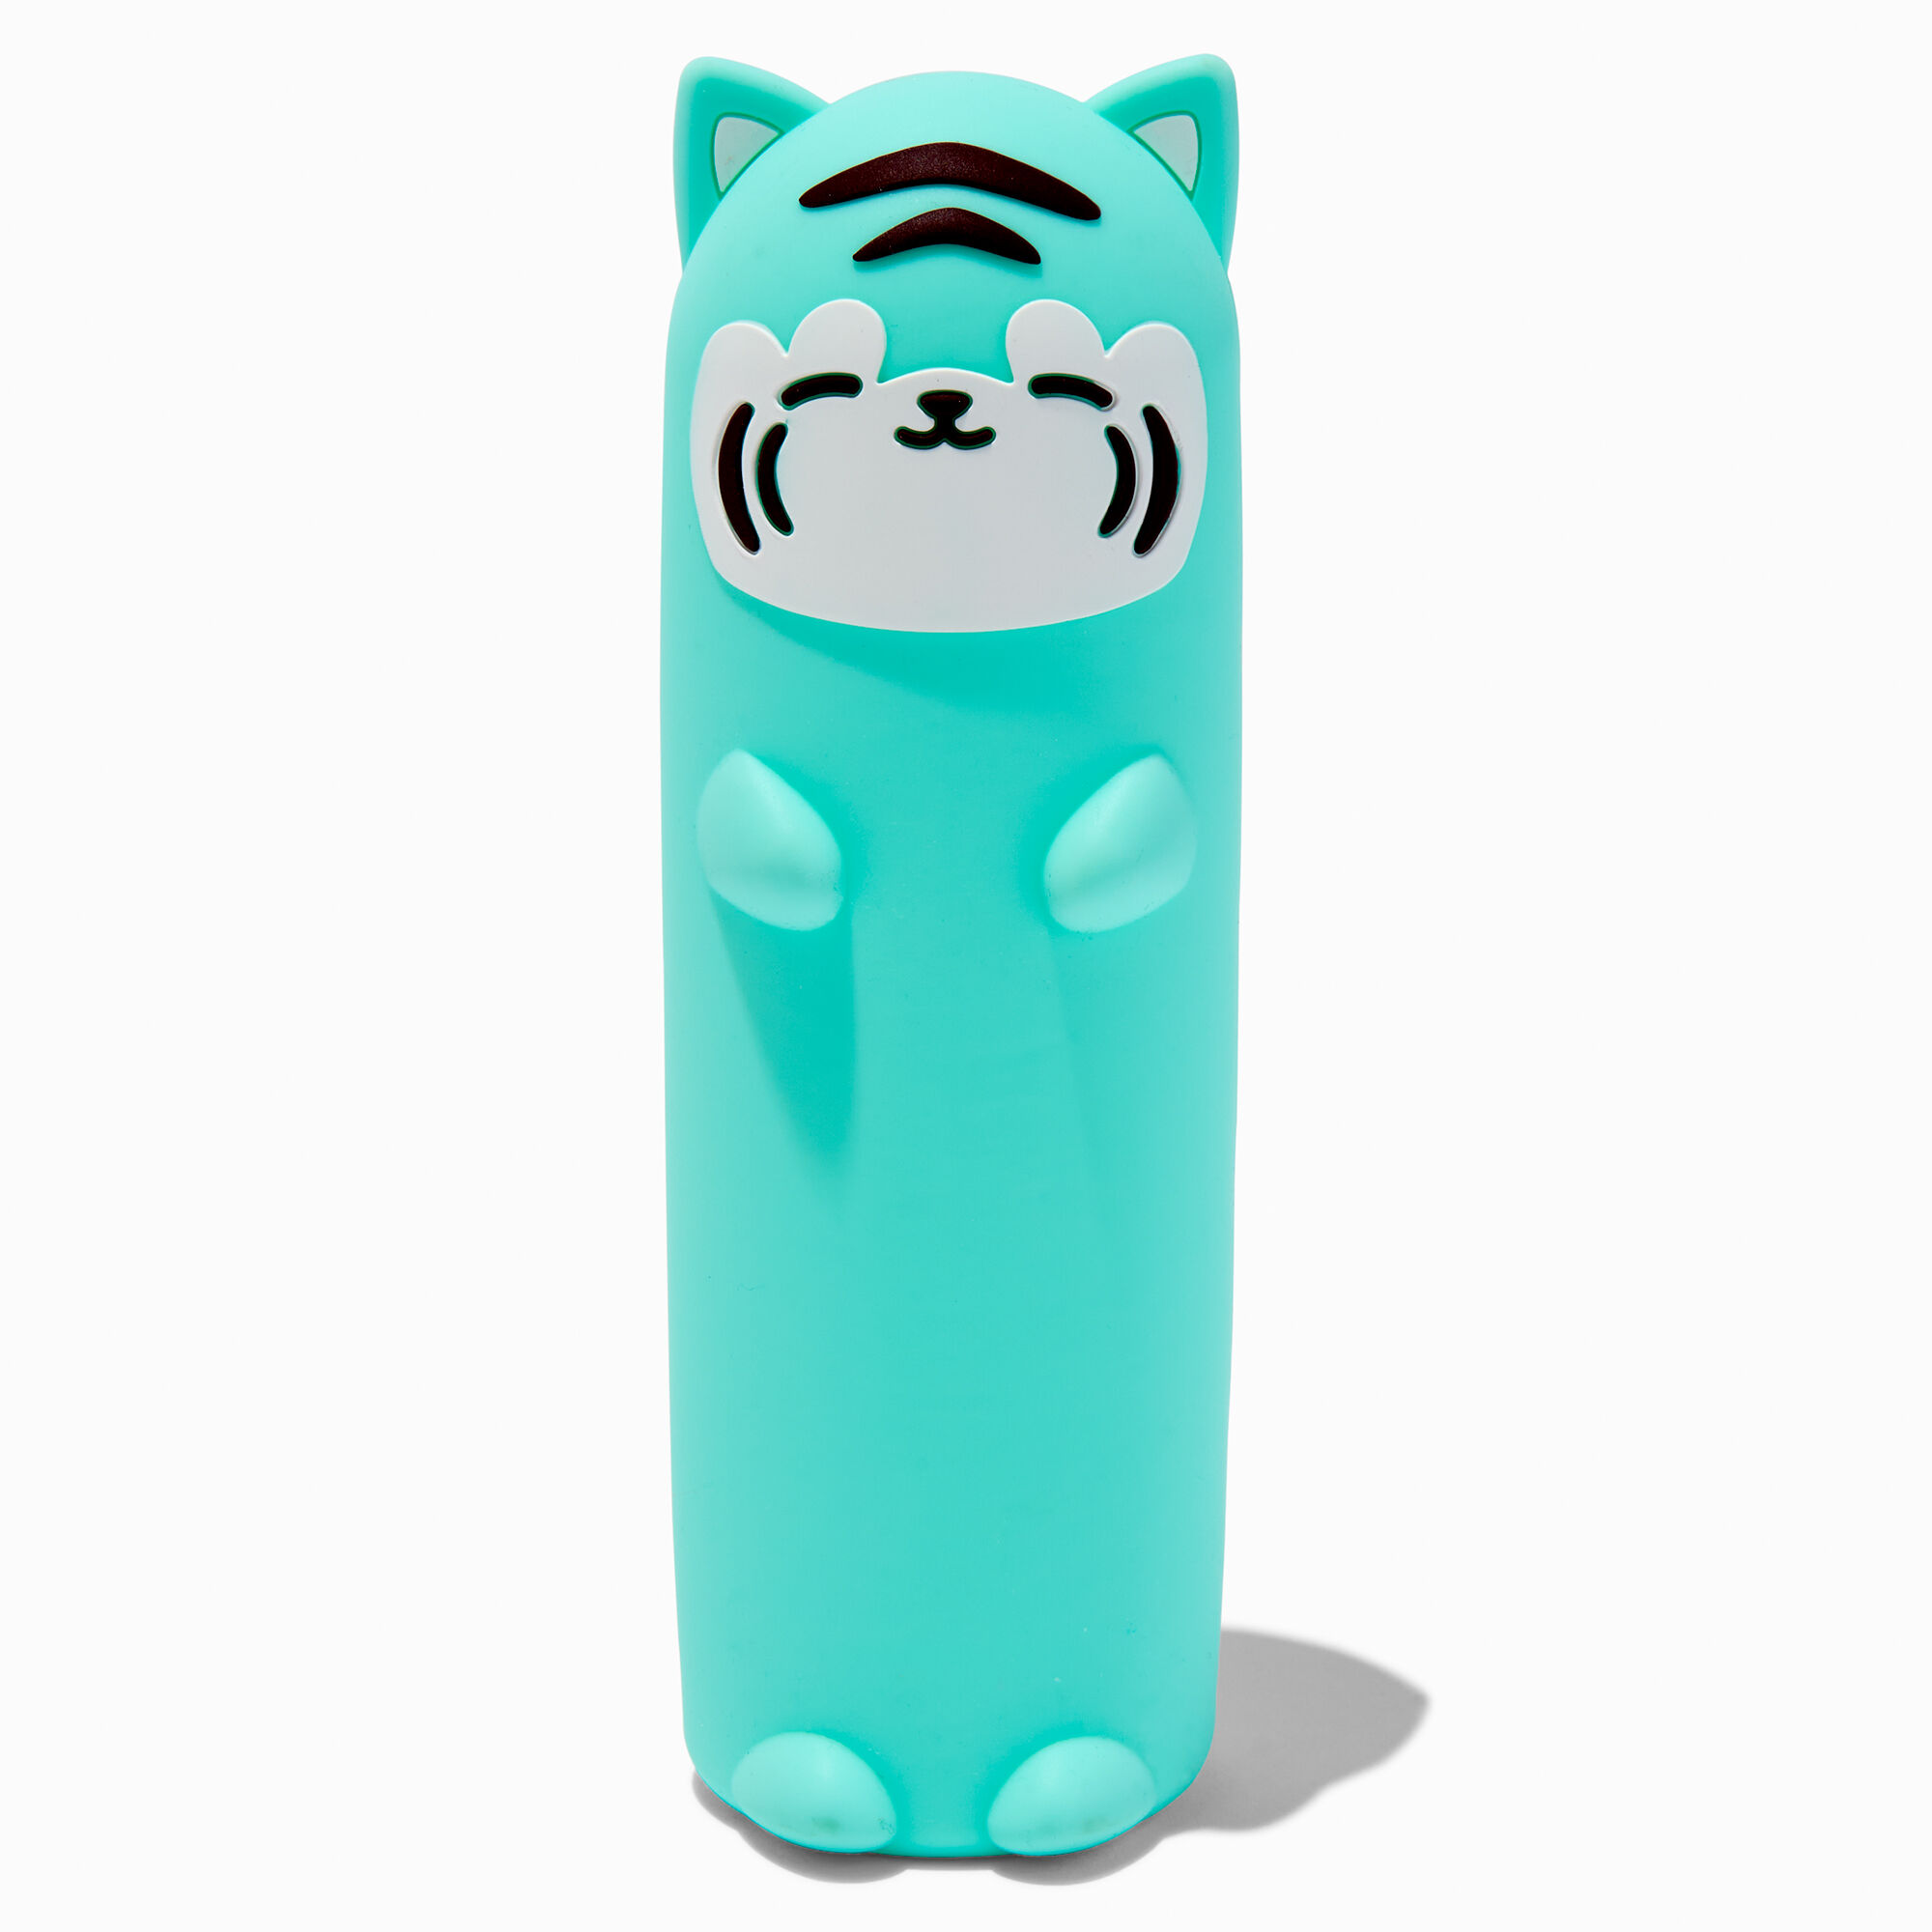 View Claires Tiger Pencil Case Teal information